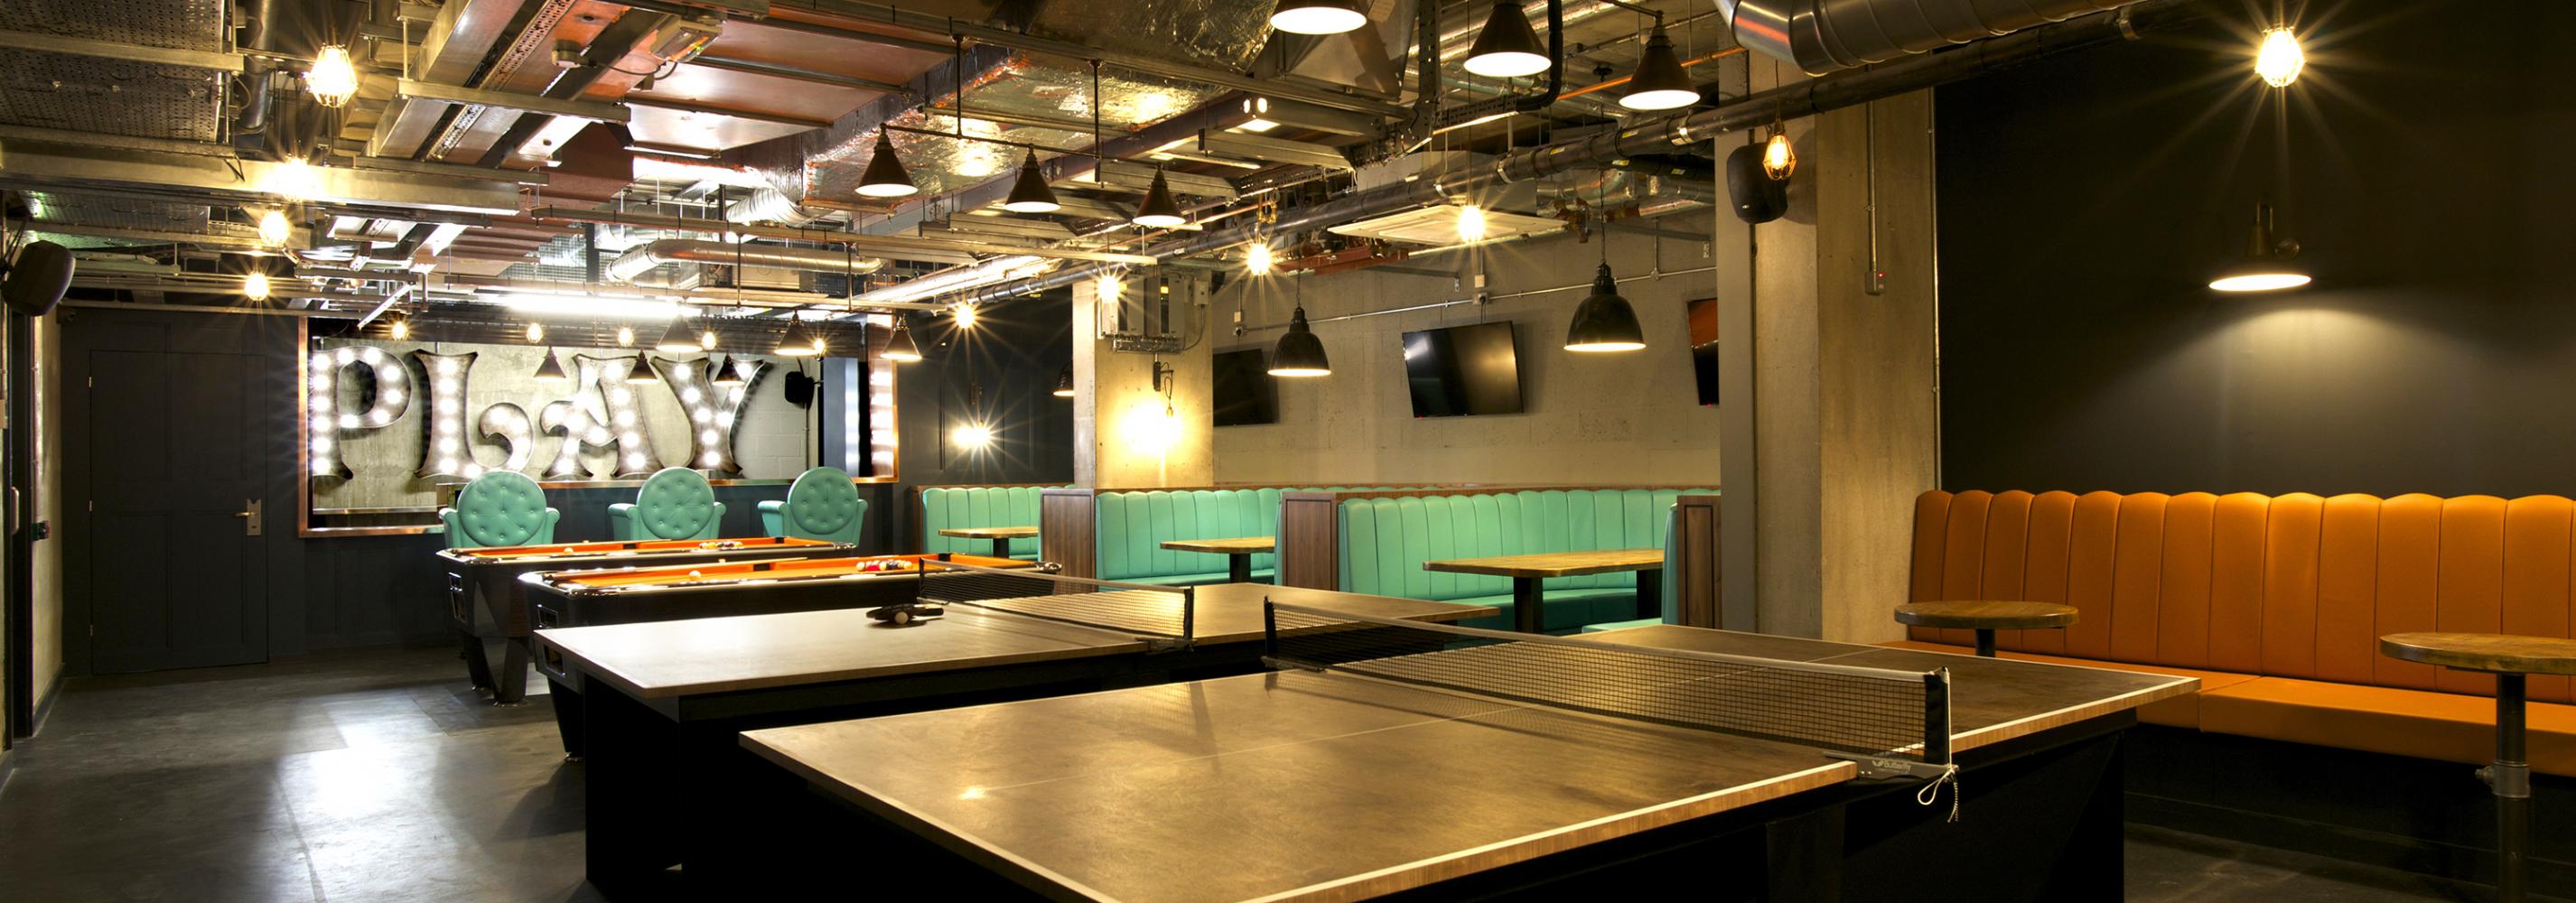 Games room with table tennis and pool tables. 